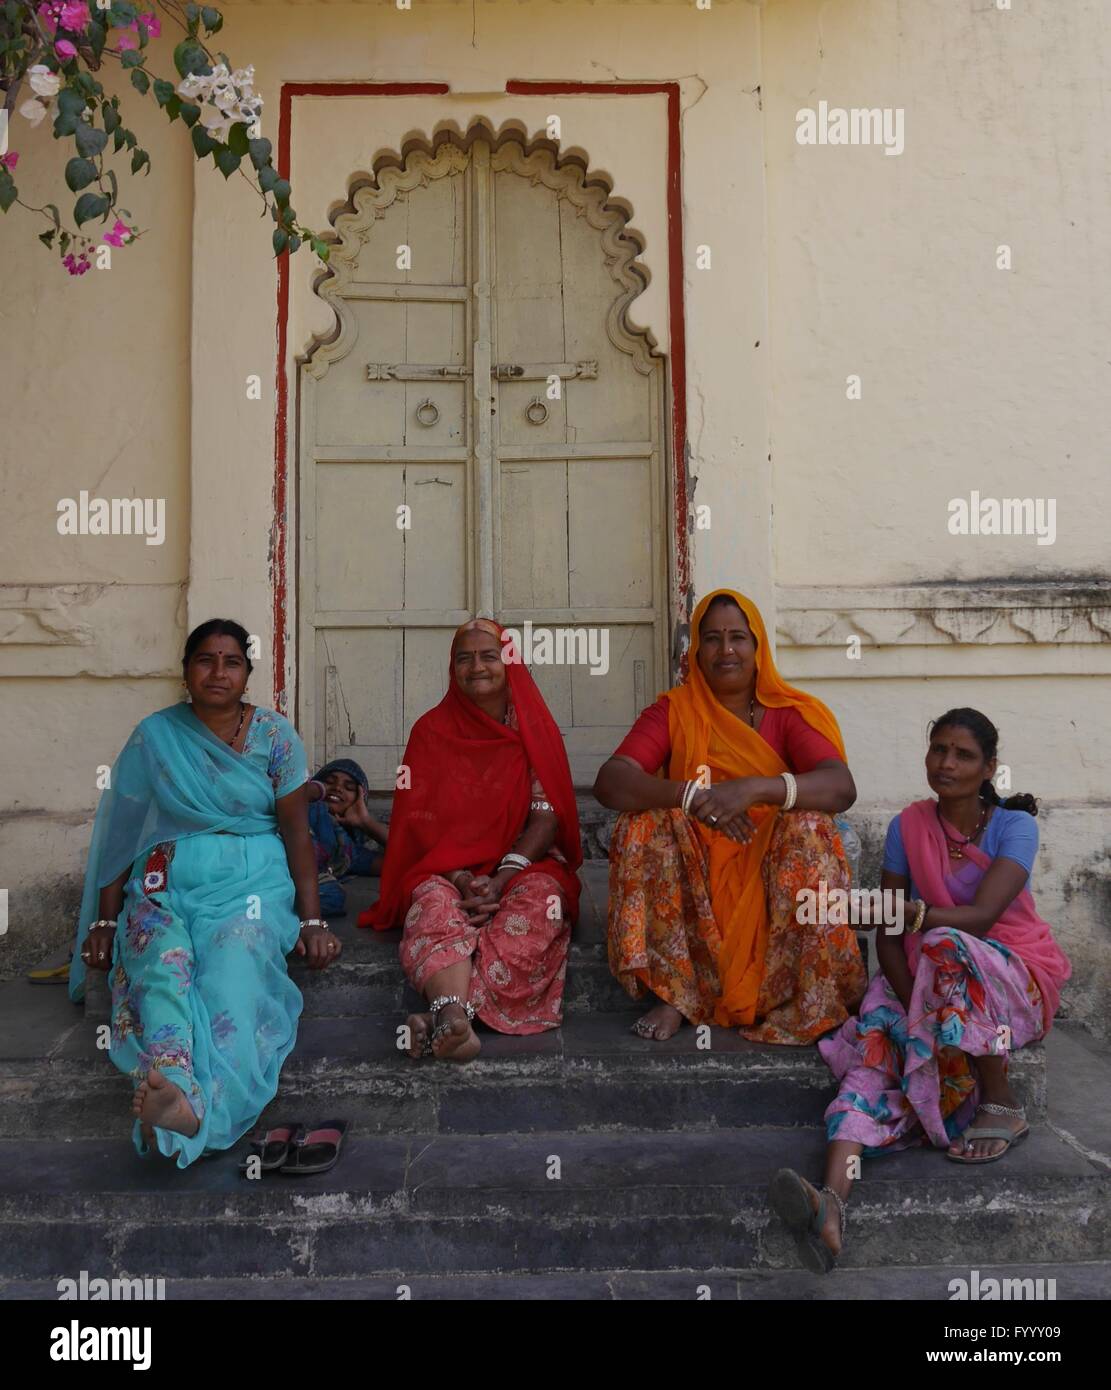 A group of Indian women, wearing the typical bright saris of Rajasthan, each in a different colour, sit smiling on some steps. Stock Photo